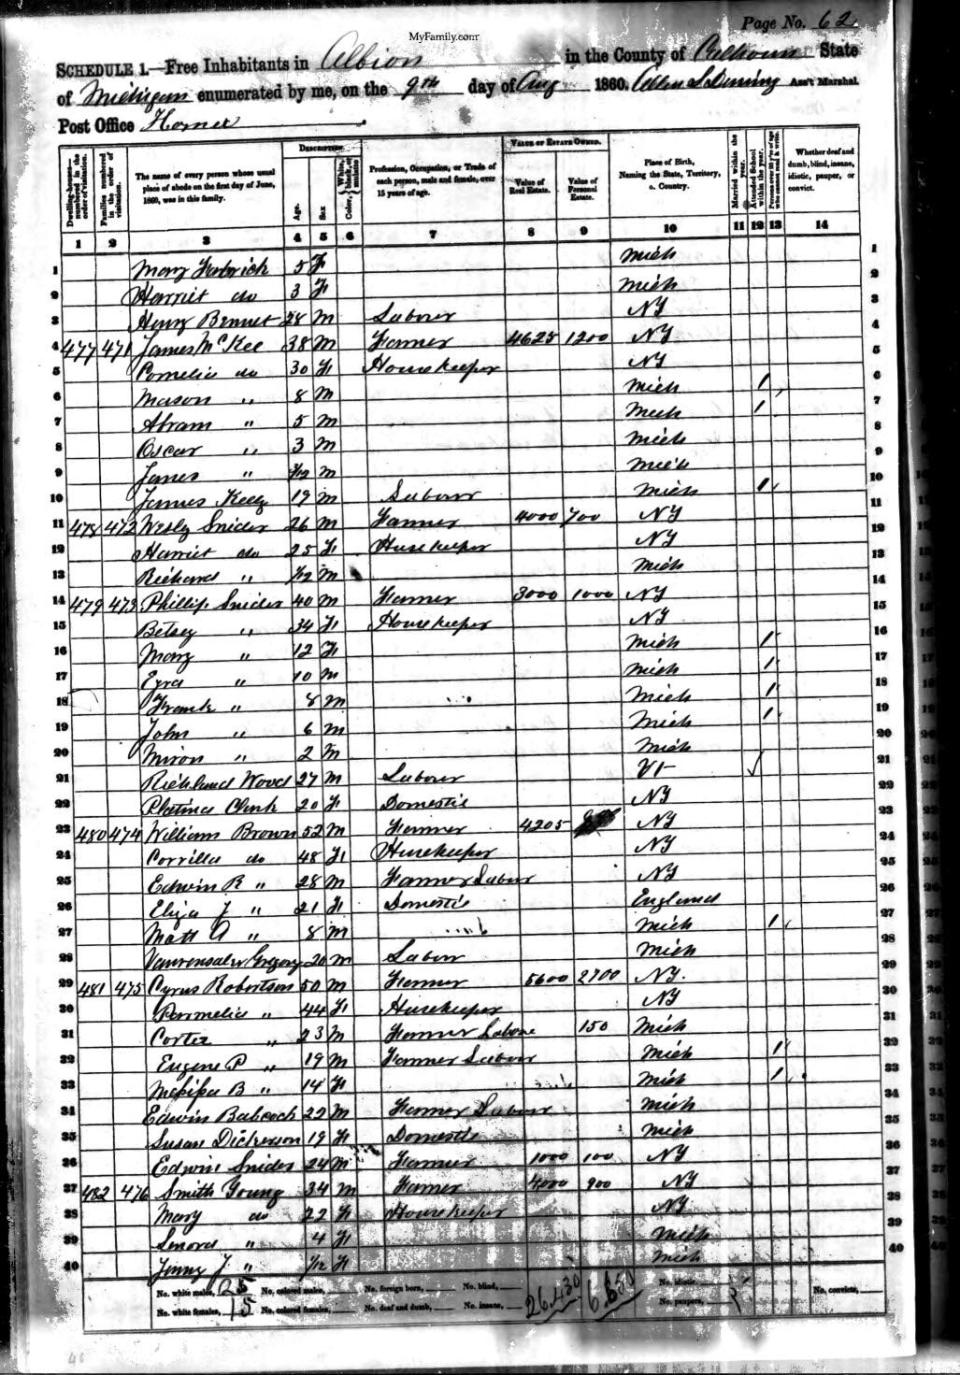 A typical United States census form from 1860